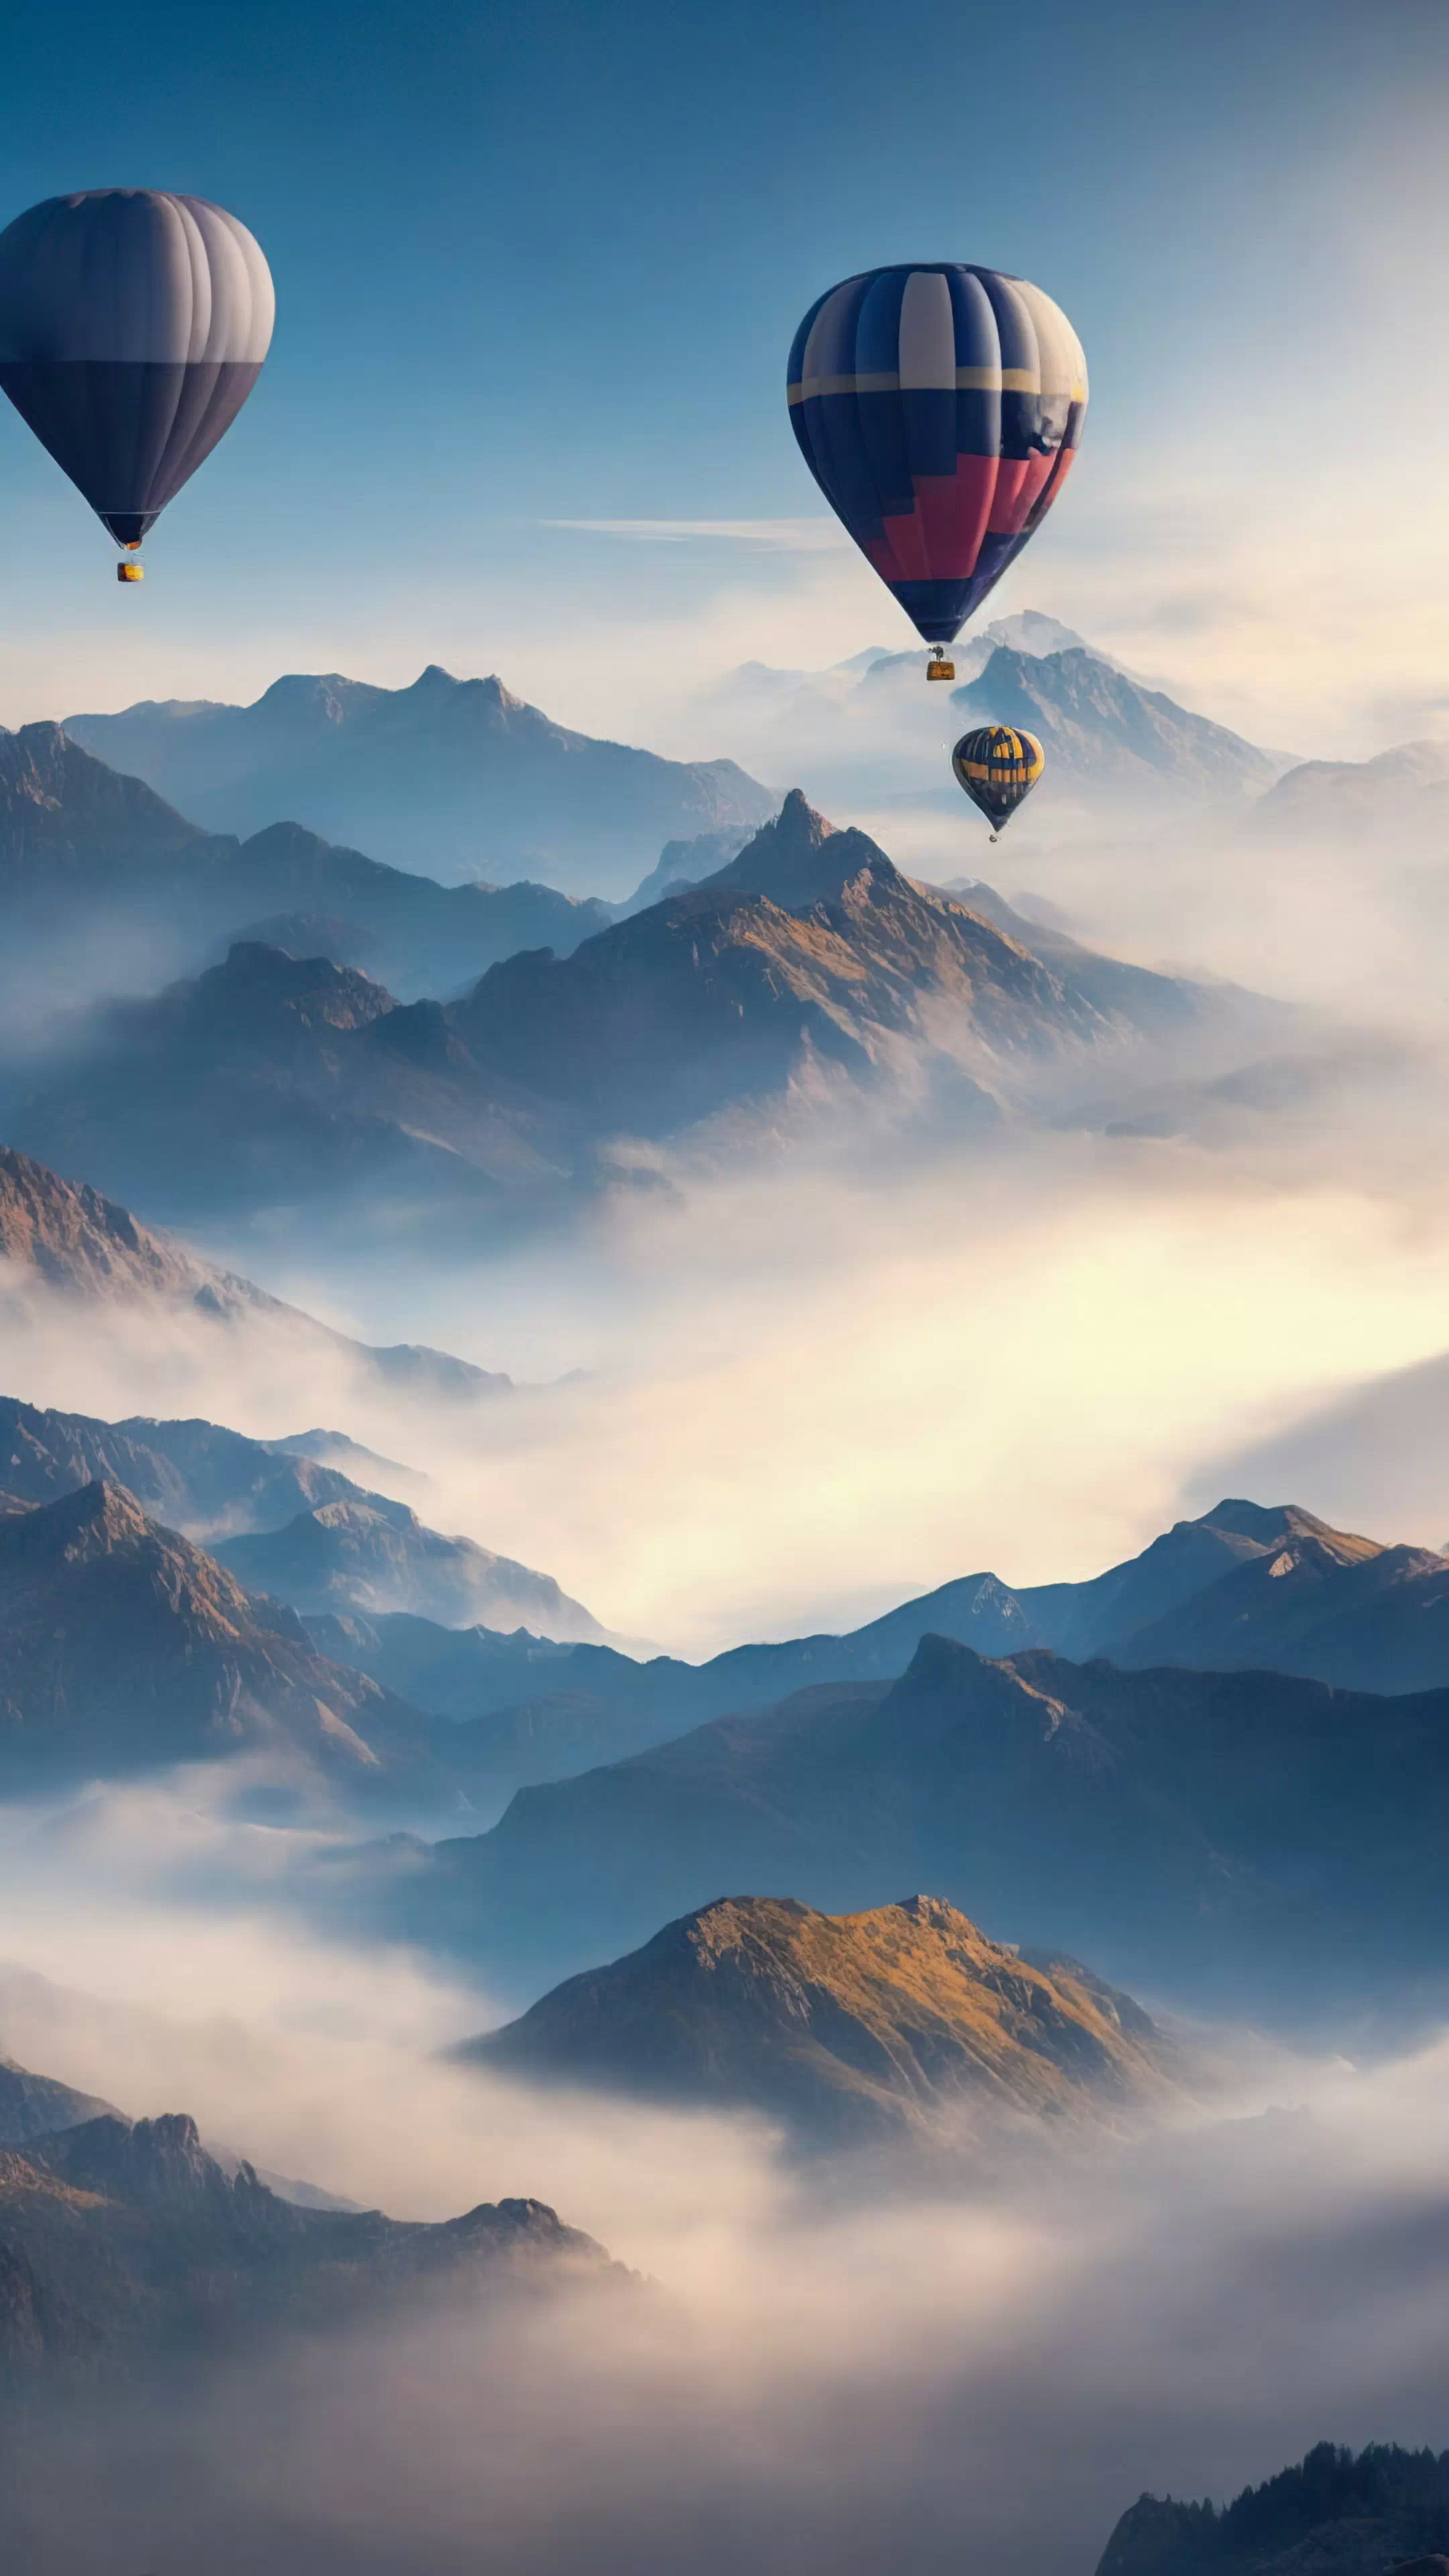 Bring the beauty of the skies to your phone with our HD nature wallpaper, capturing a surreal sky filled with air balloons over a mountainous landscape, and let your device become a window to a world of fantasy.